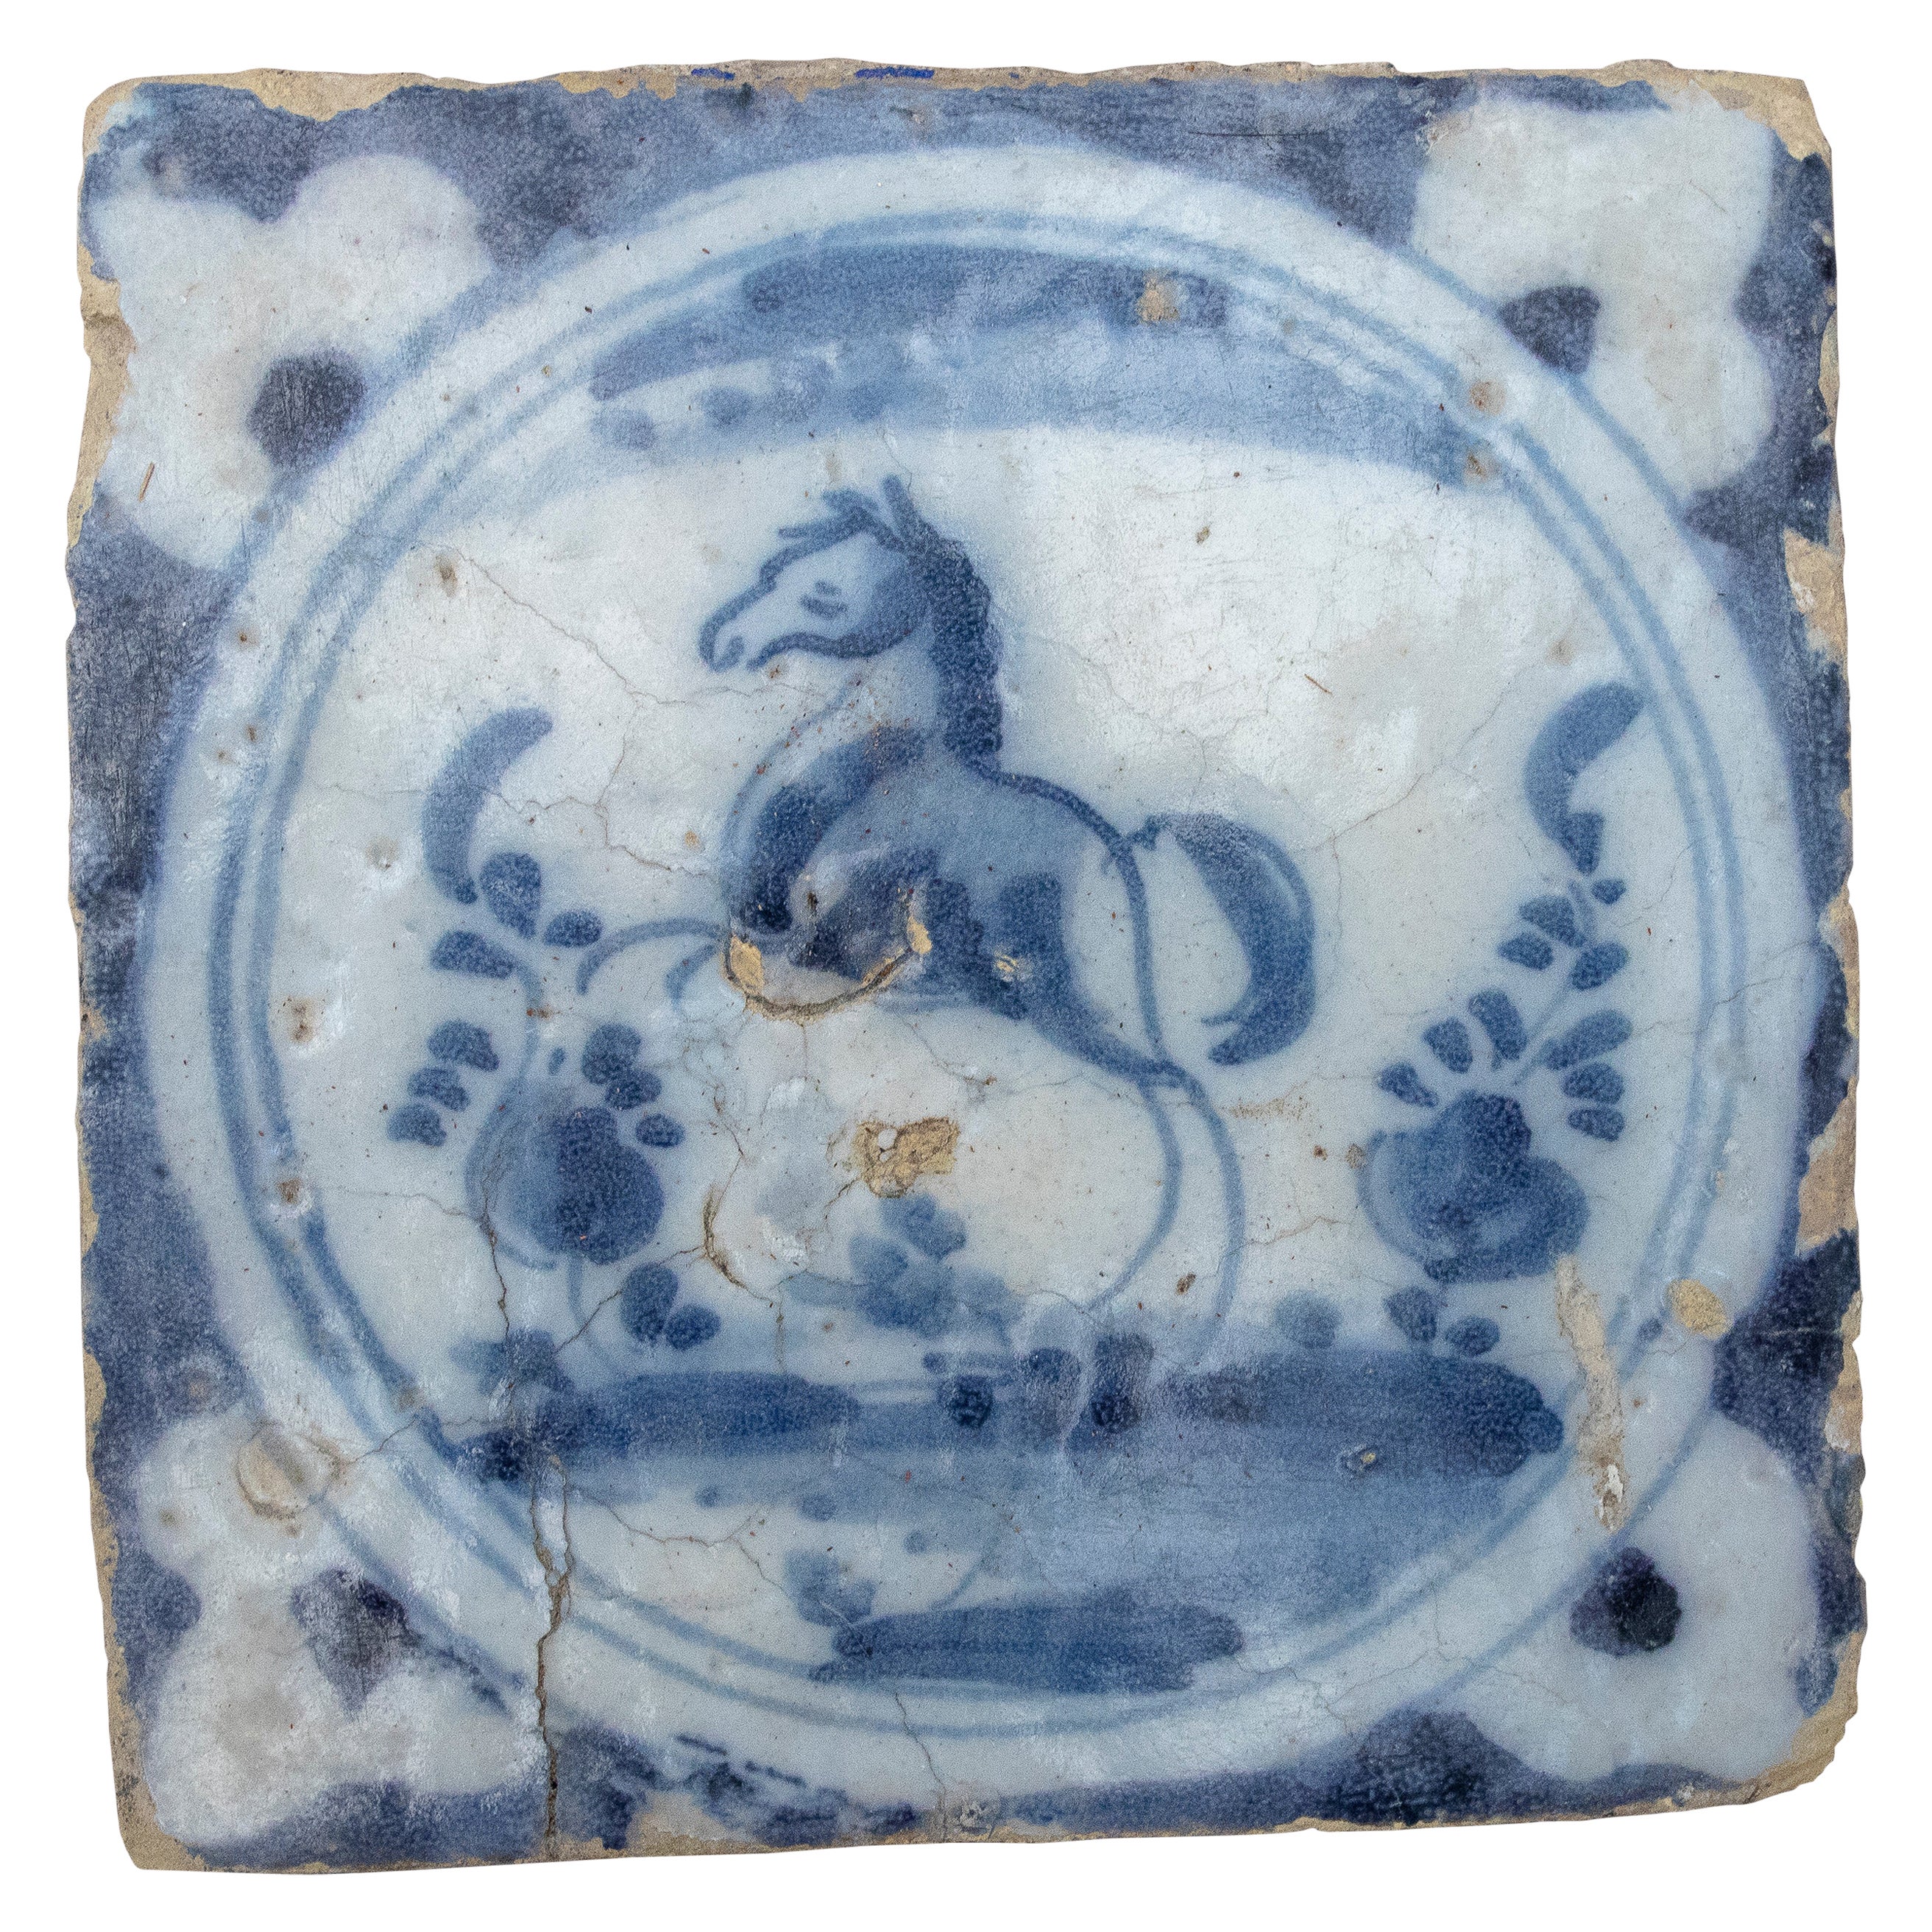 18th Century Spanish Glazed Ceramic Tile from Triana in Blue and White